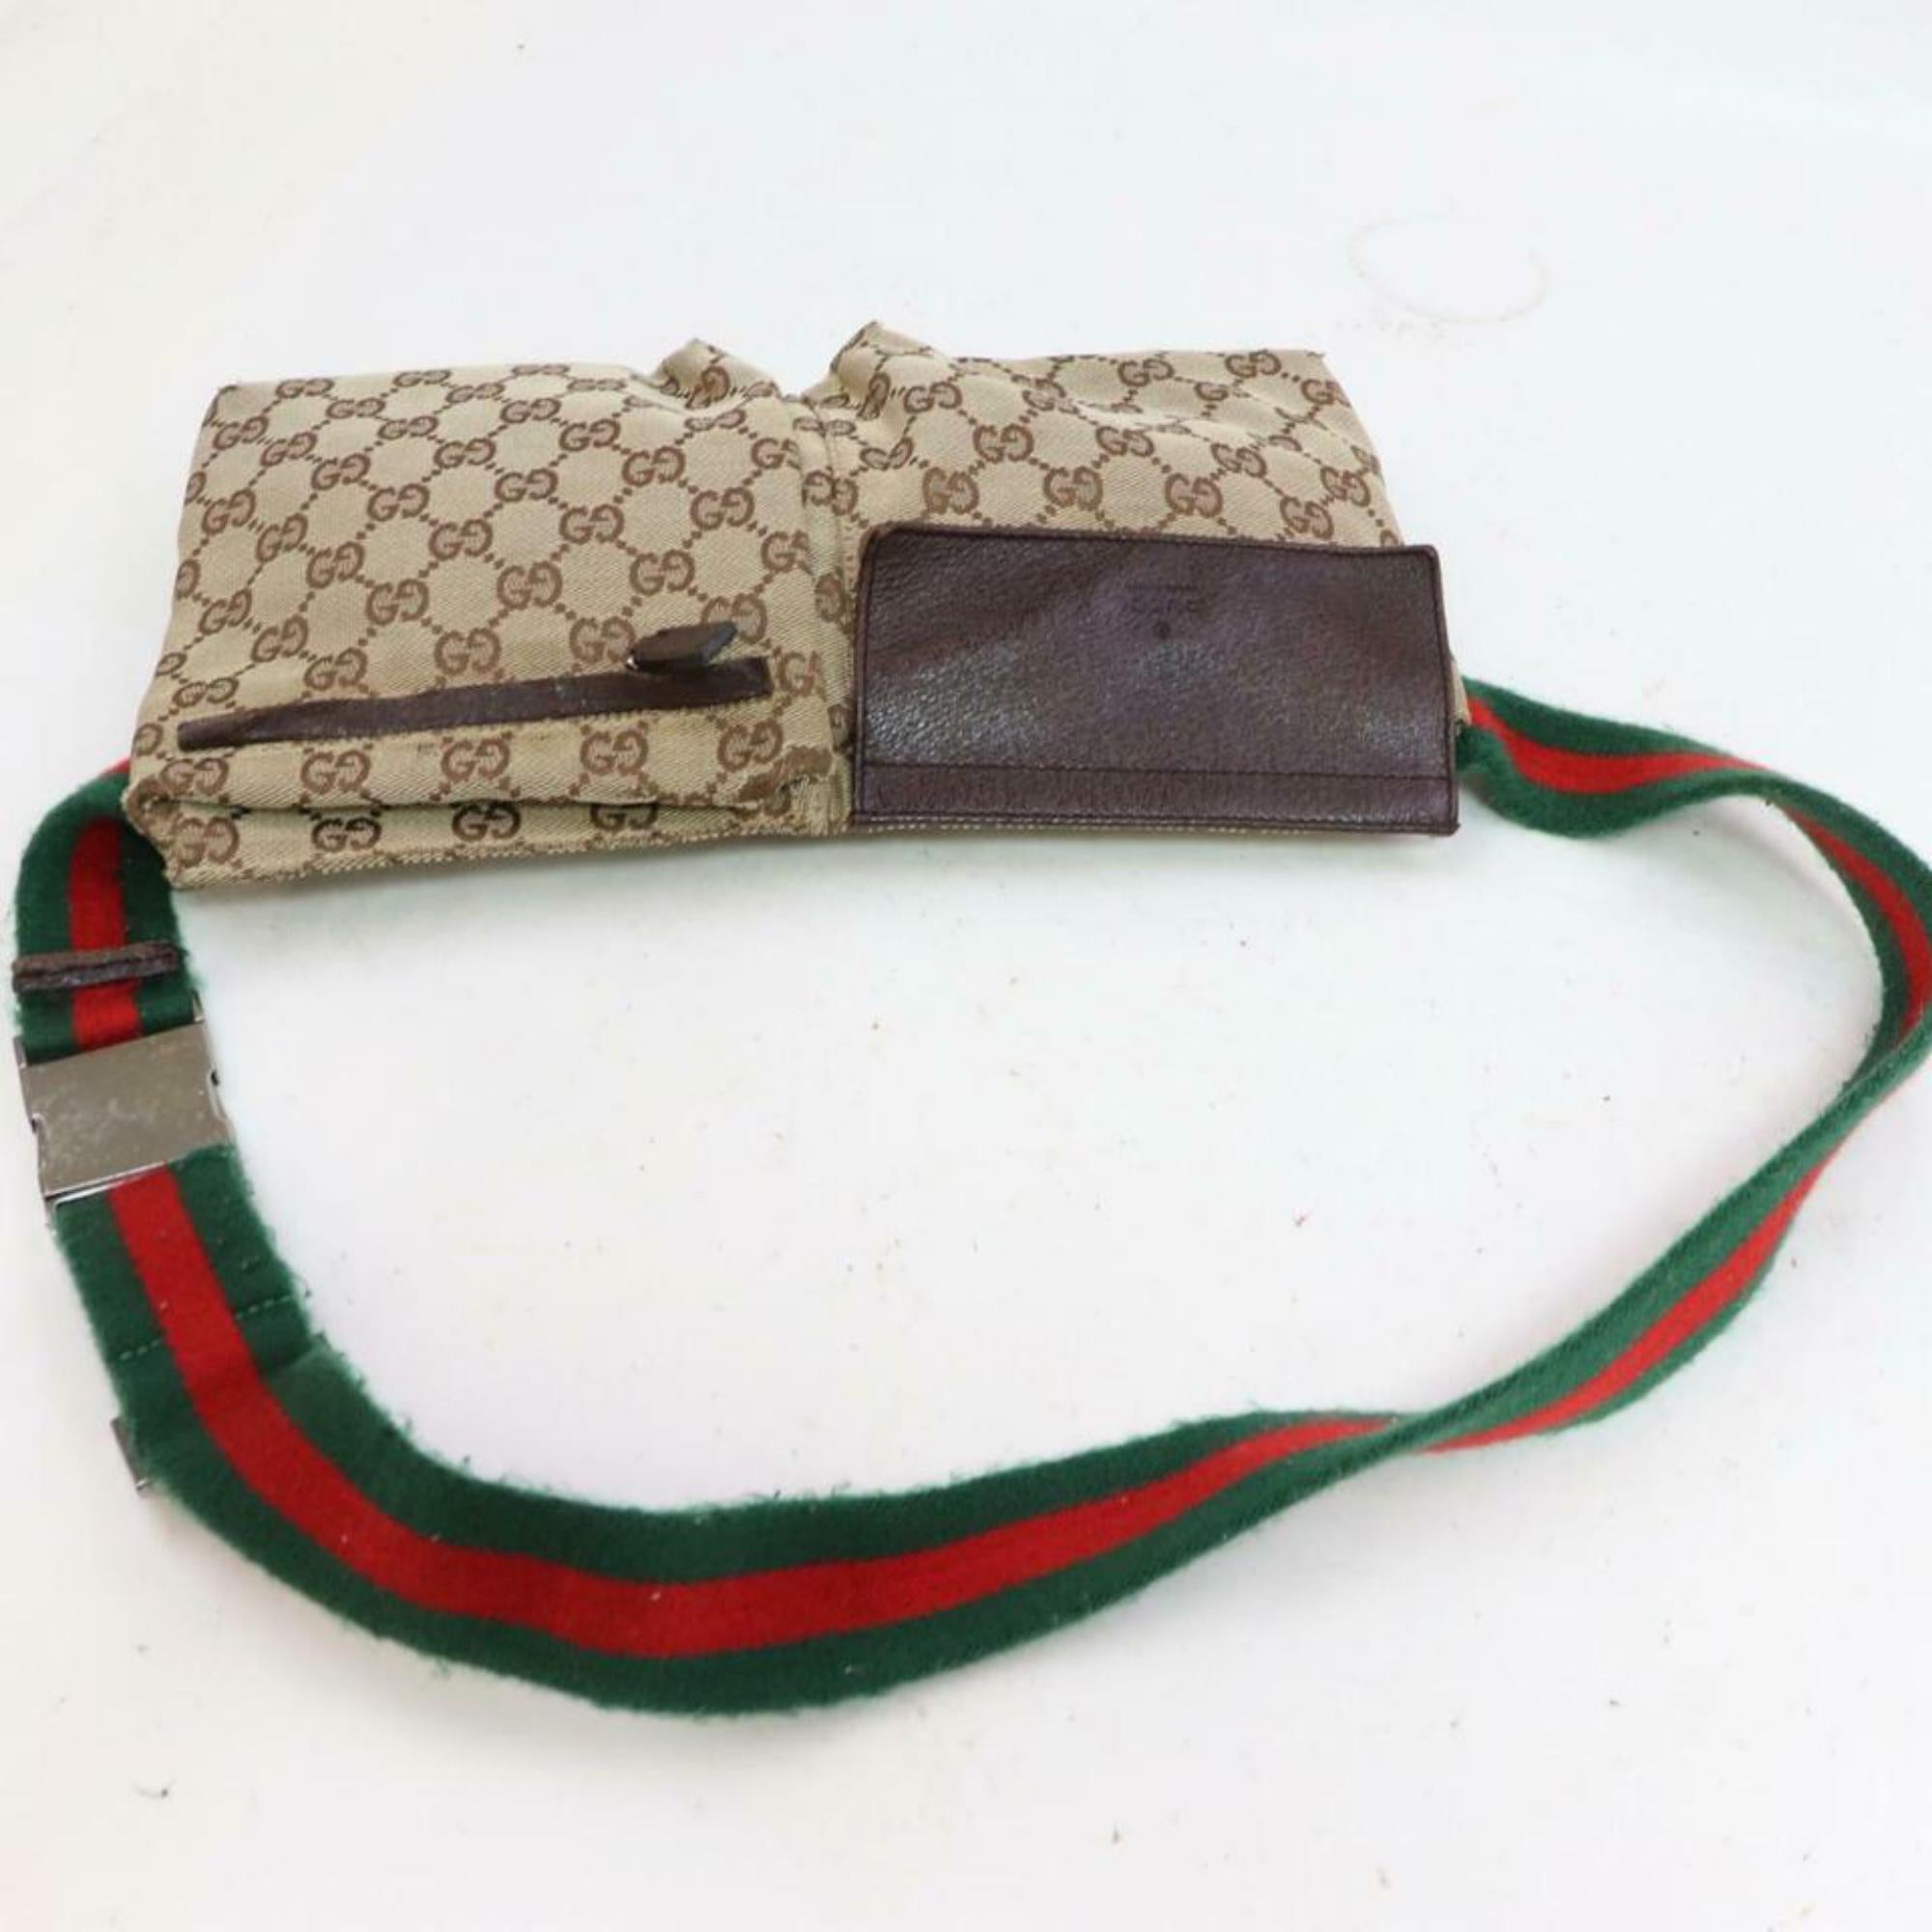 Gucci Sherry Web Belt Fanny Pack Waist Pouch 870589 Brown Canvas Cross Body Bag In Good Condition For Sale In Forest Hills, NY